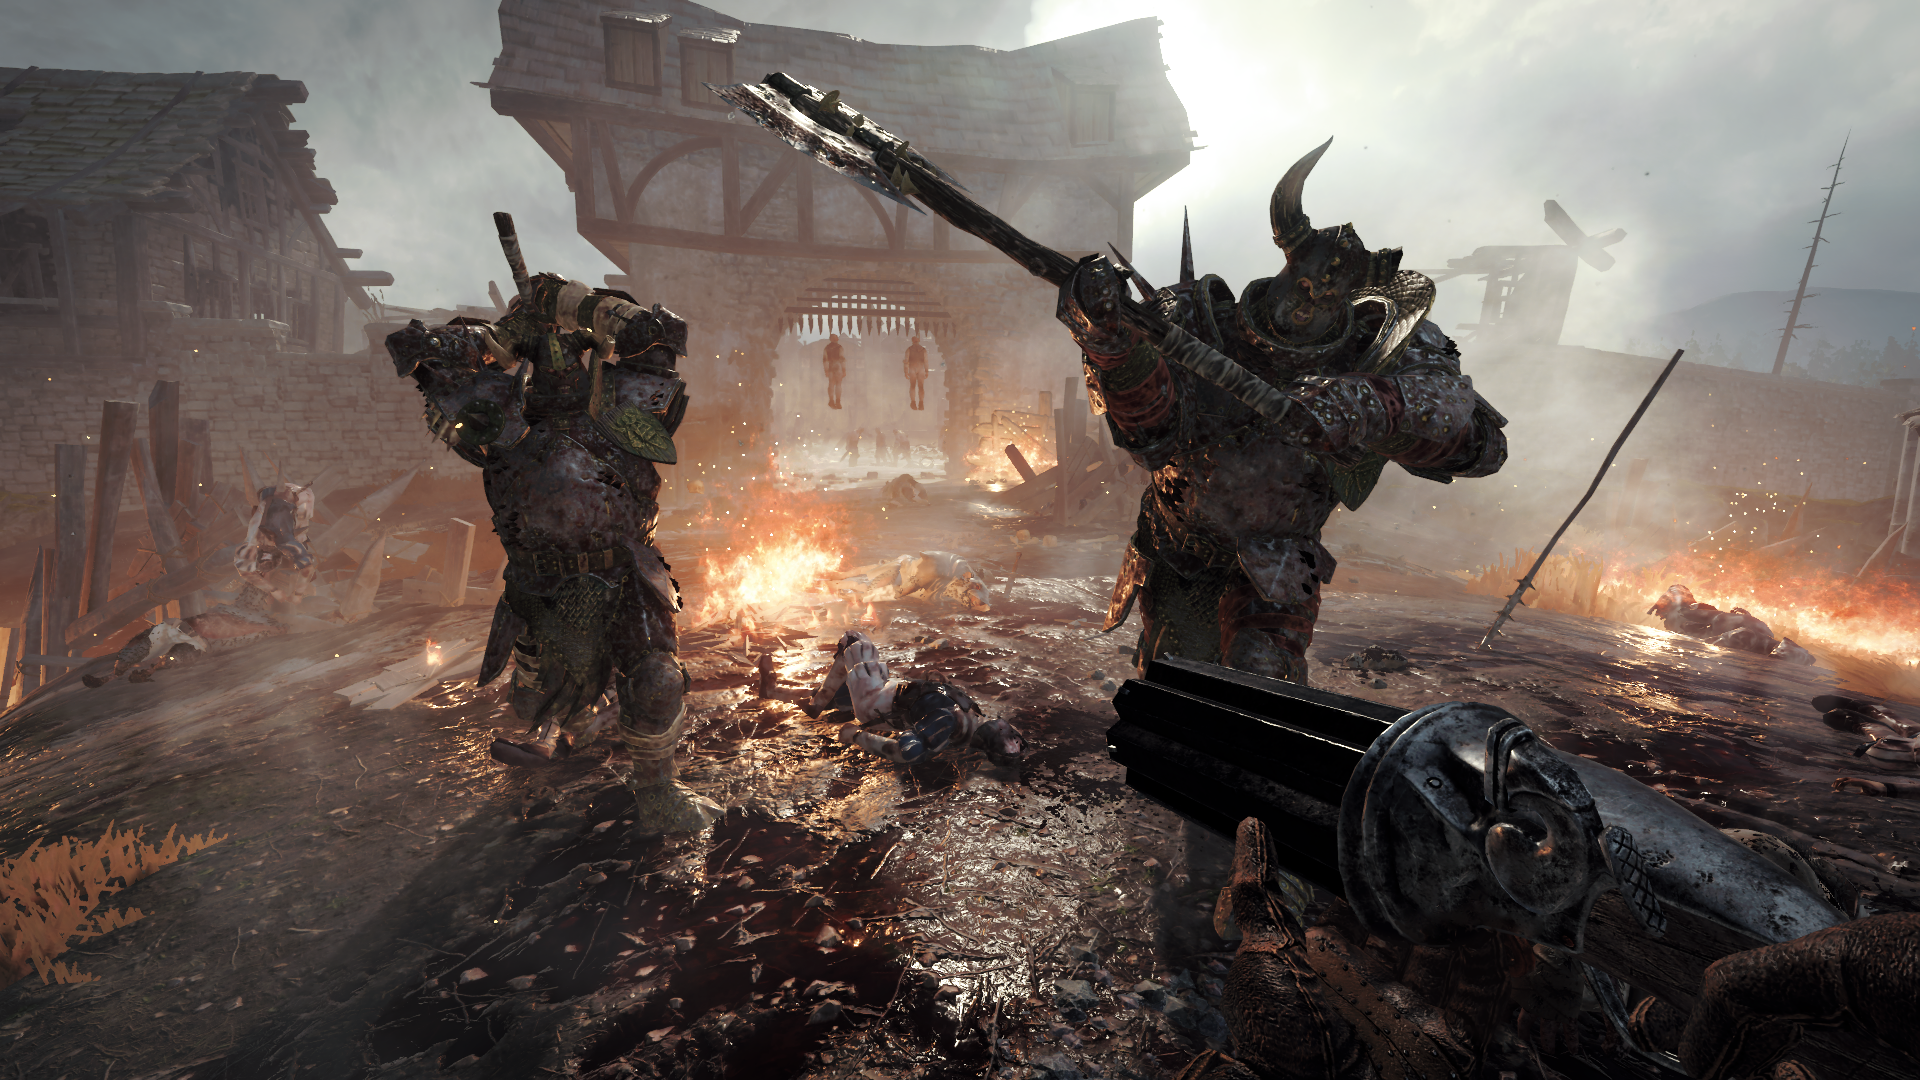 Media asset in full size related to 3dfxzone.it news item entitled as follows: Warhammer: Vermintide 2 non solo per PC ma anche per Xbox e PS4 | Image Name: news27619_Warhammer-Vermintide-2-Screenshot_6.png